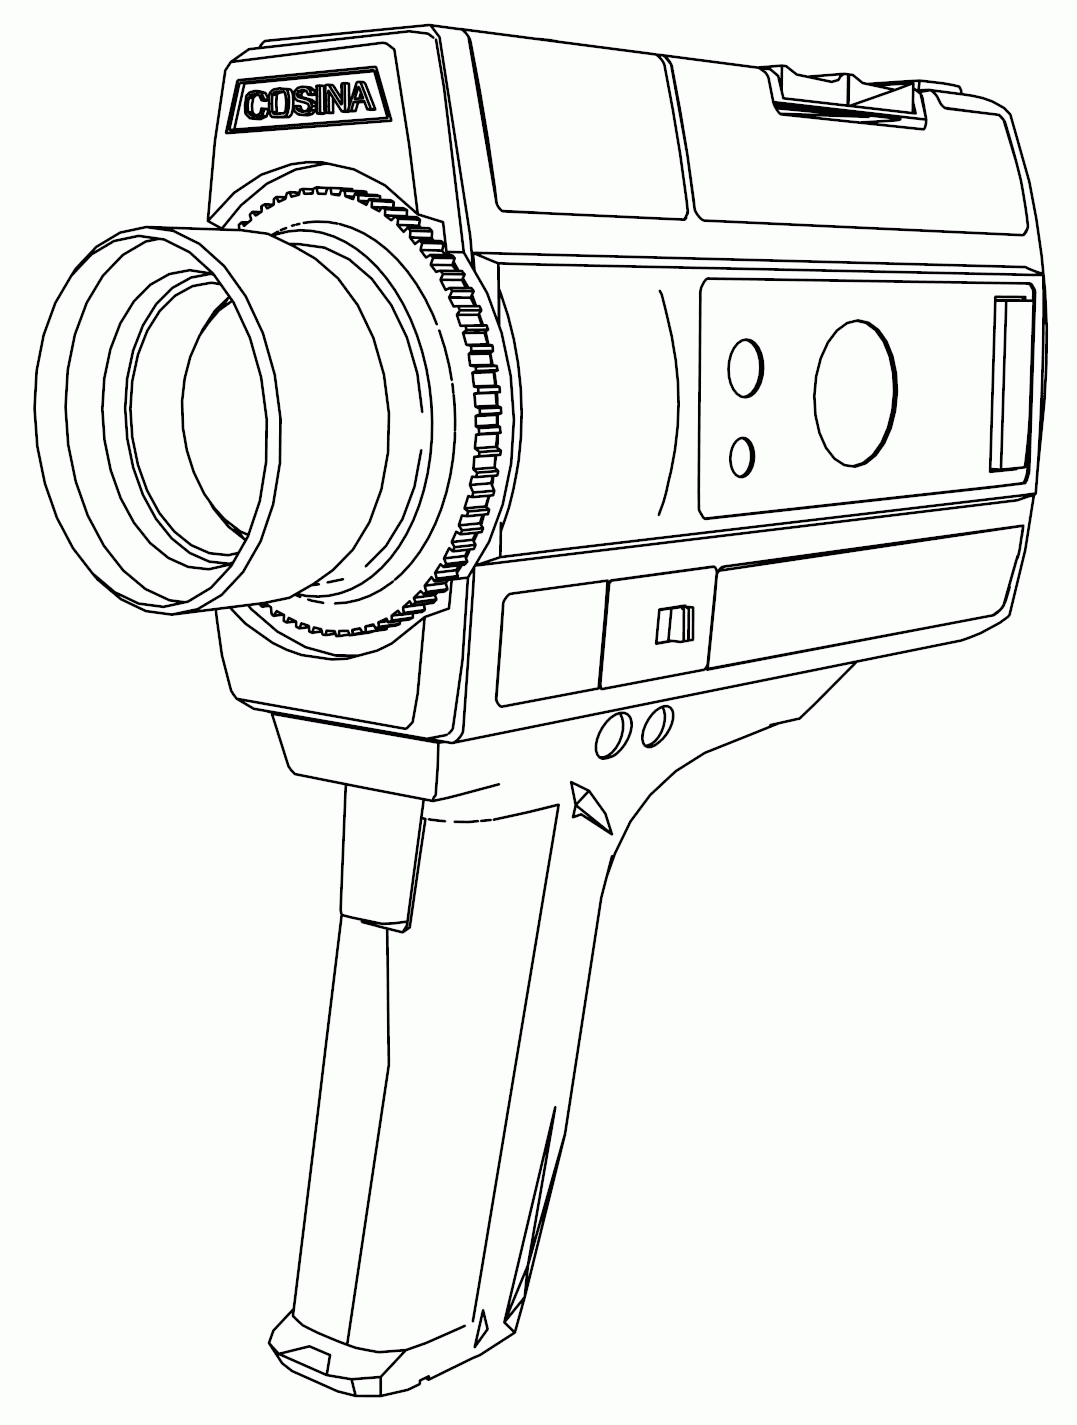 Download Camera Coloring Pages - Coloring Home